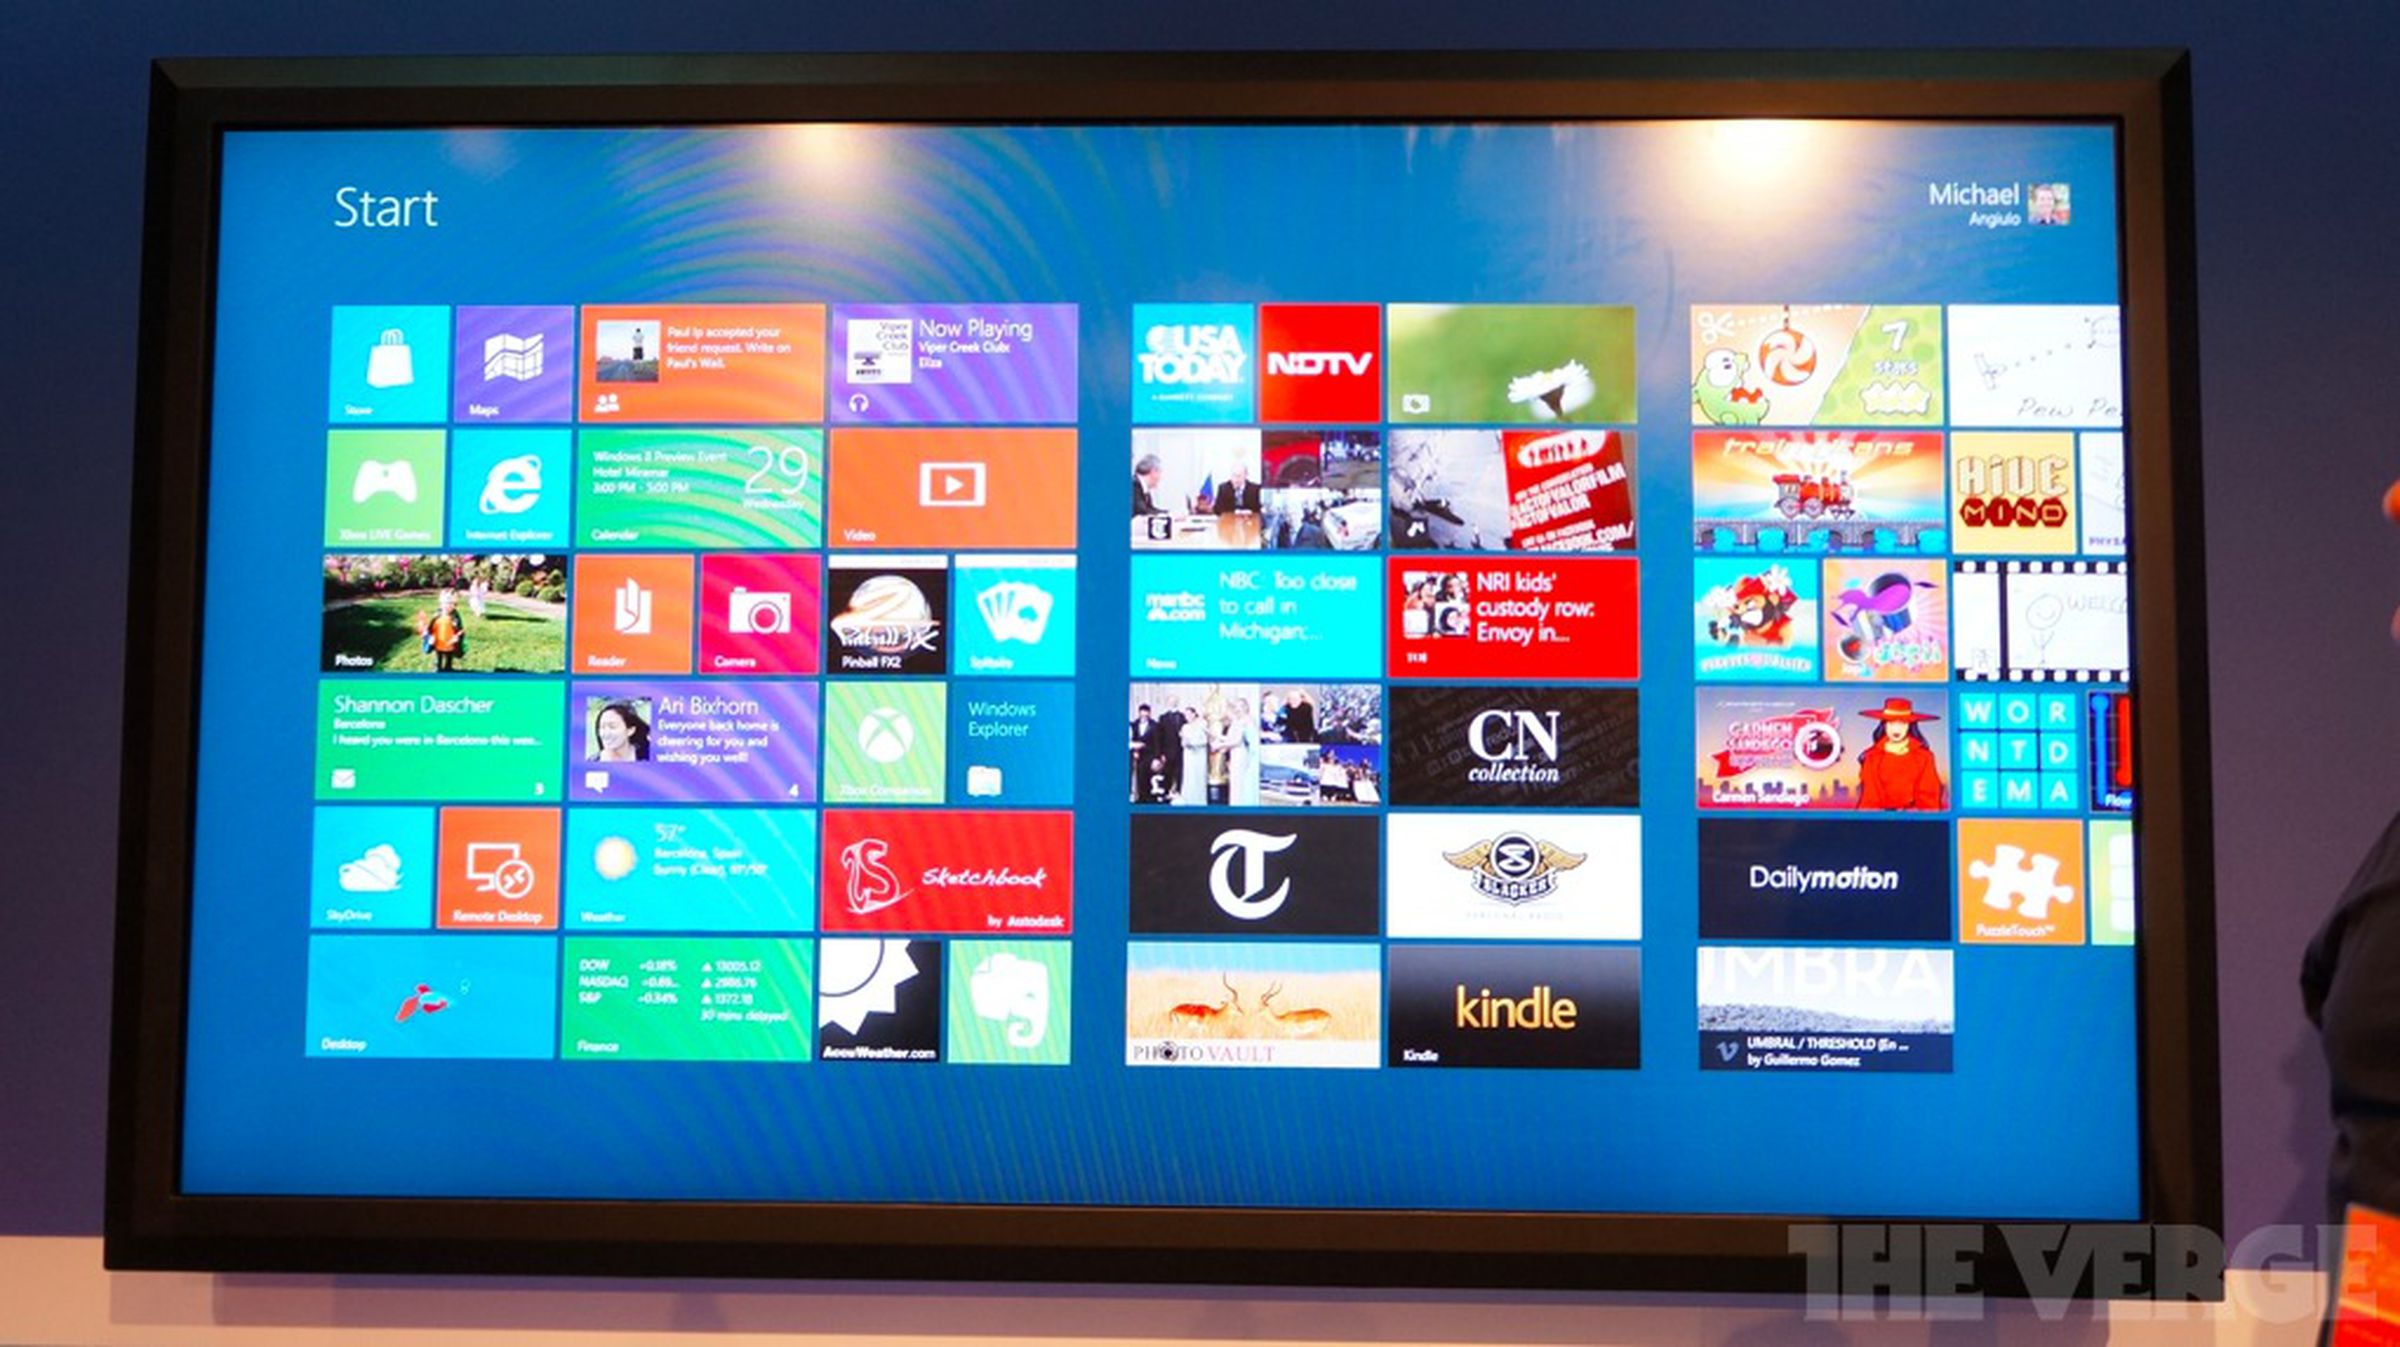 Windows 8 Consumer Preview on an 82-inch display